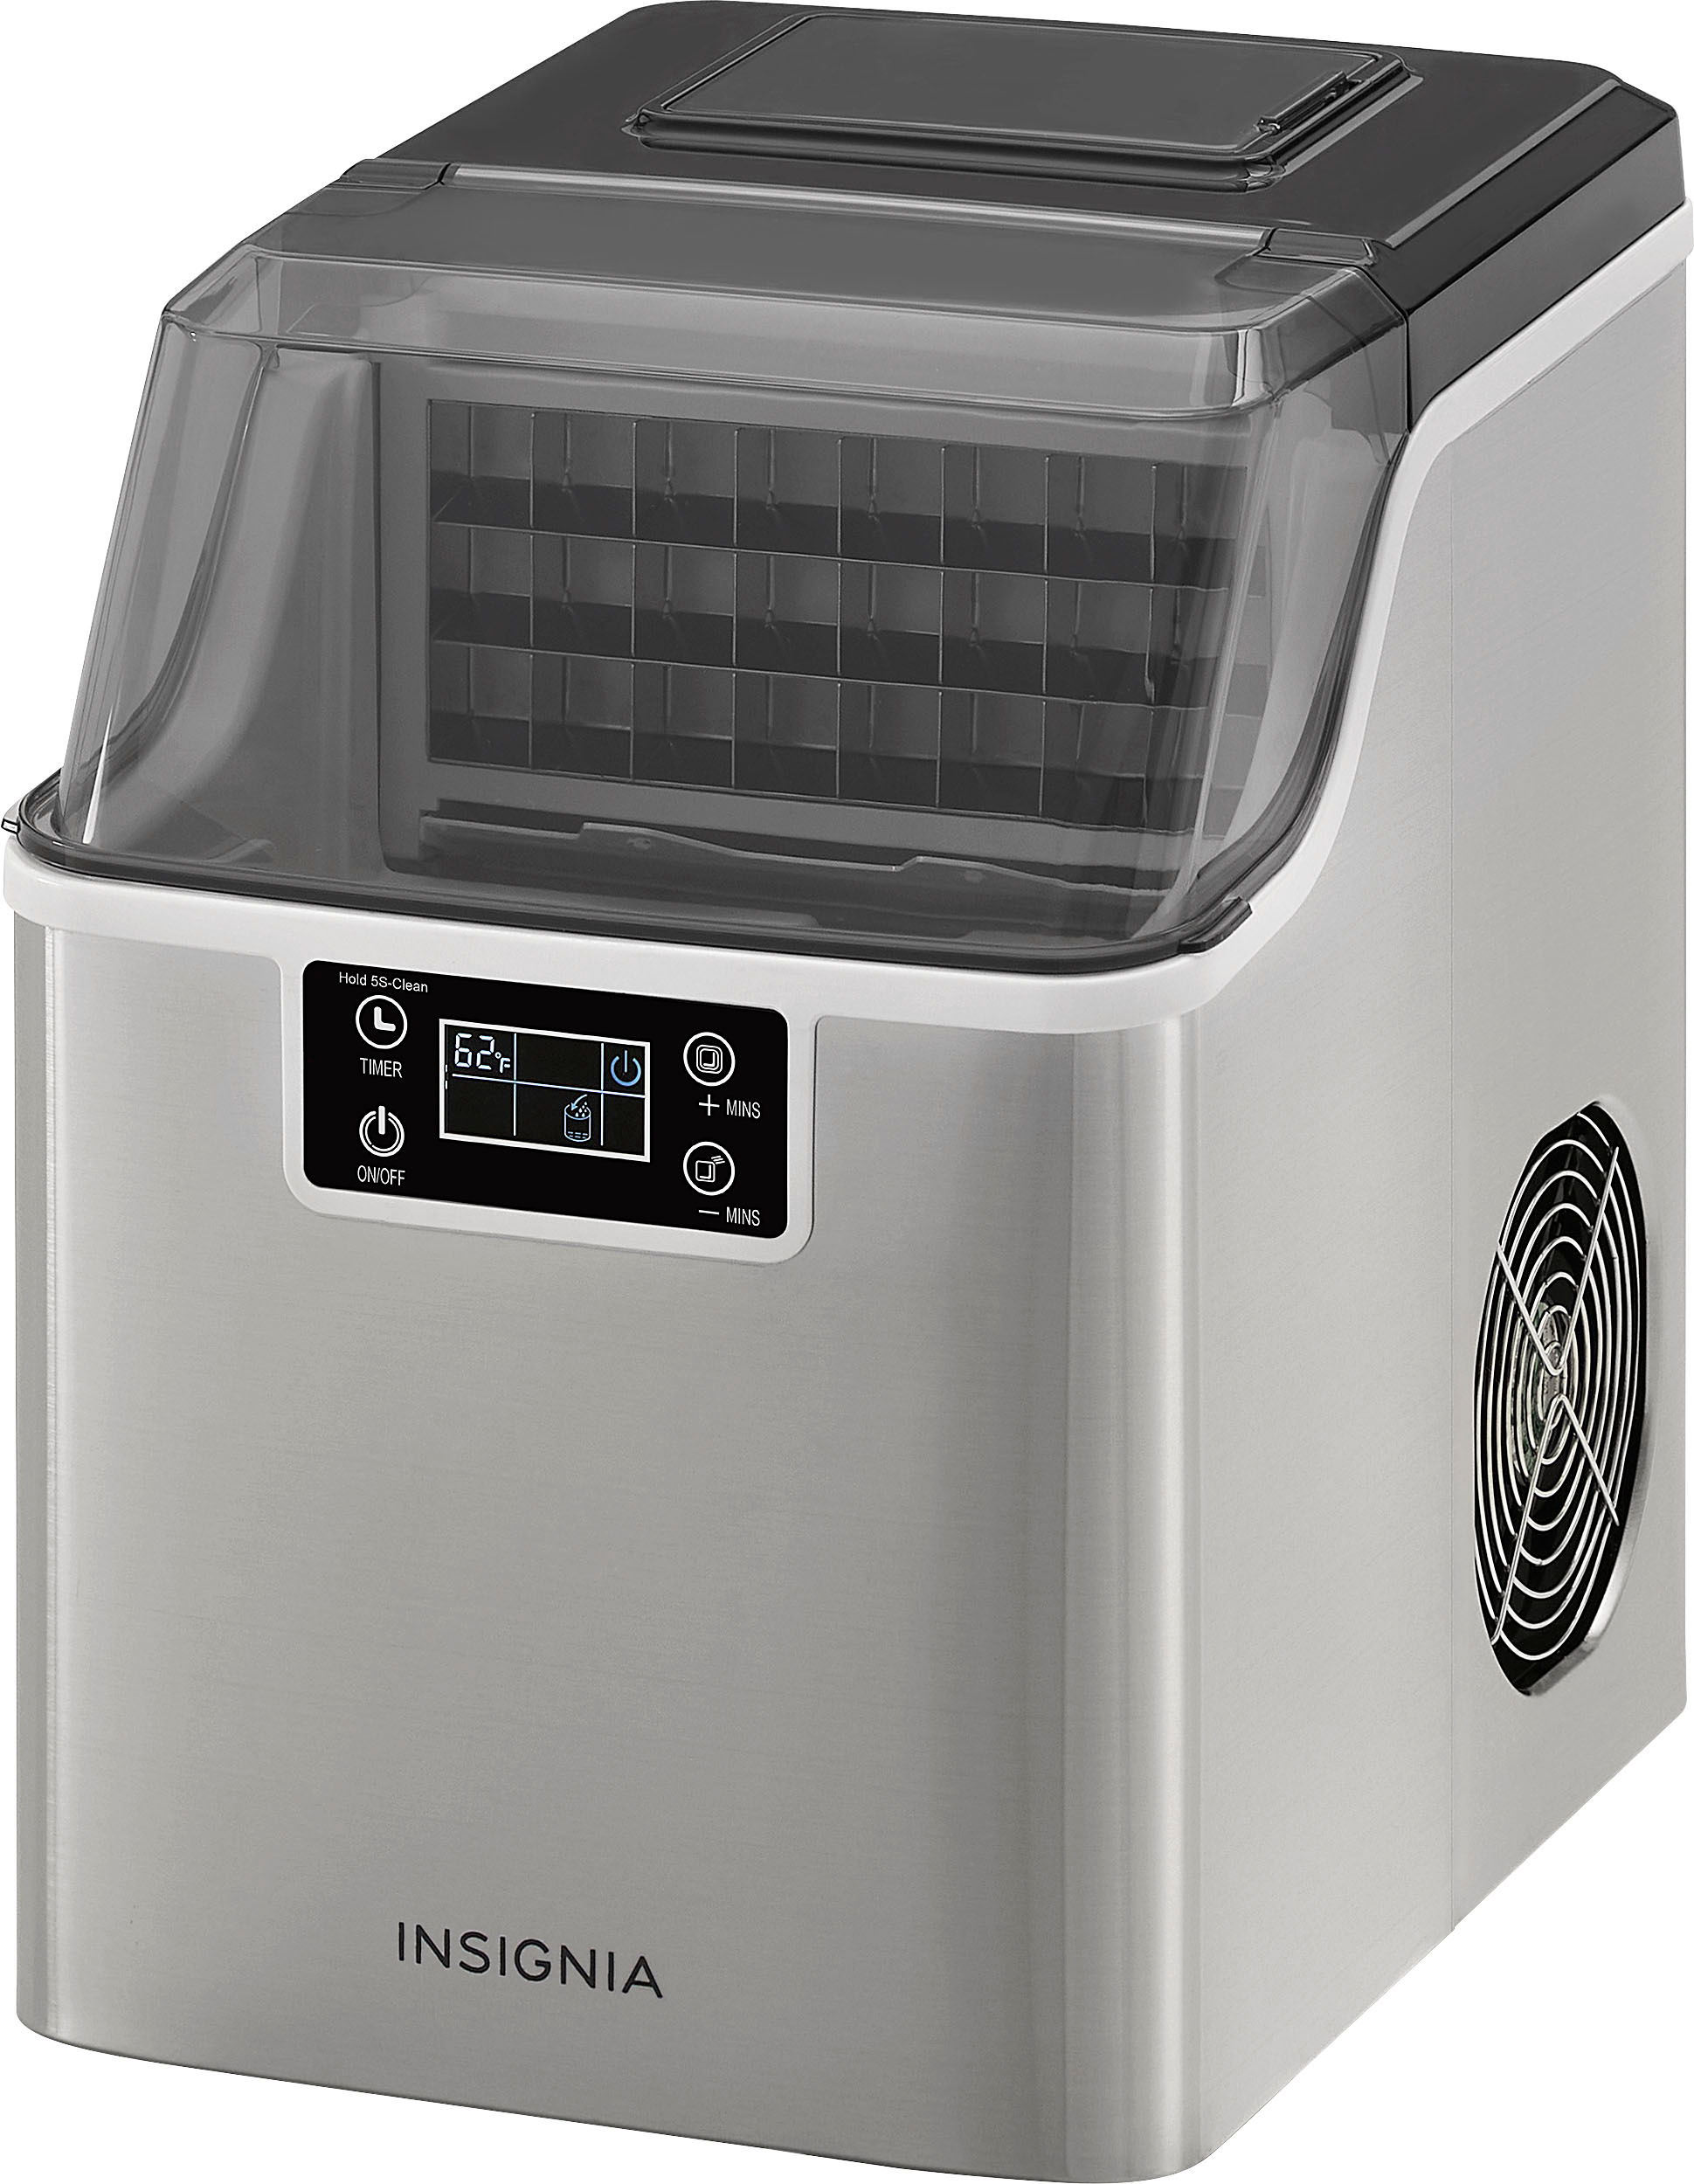 Insignia 44 Lb. Portable Clear Ice Maker with Auto Shut-off Stainless Steel